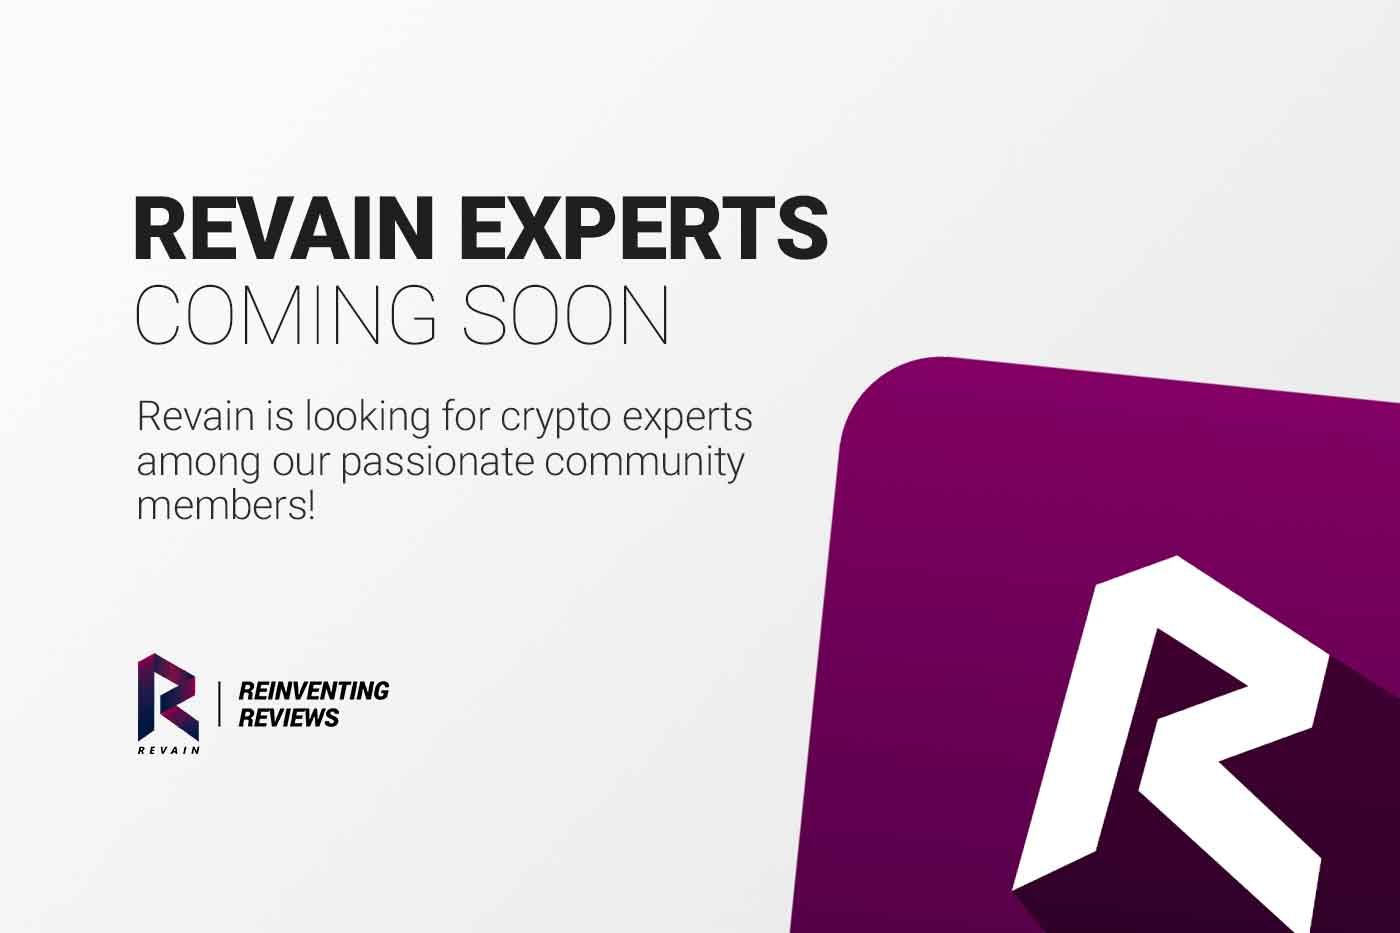 Article Revain is looking for Crypto Experts among our most passionate community members